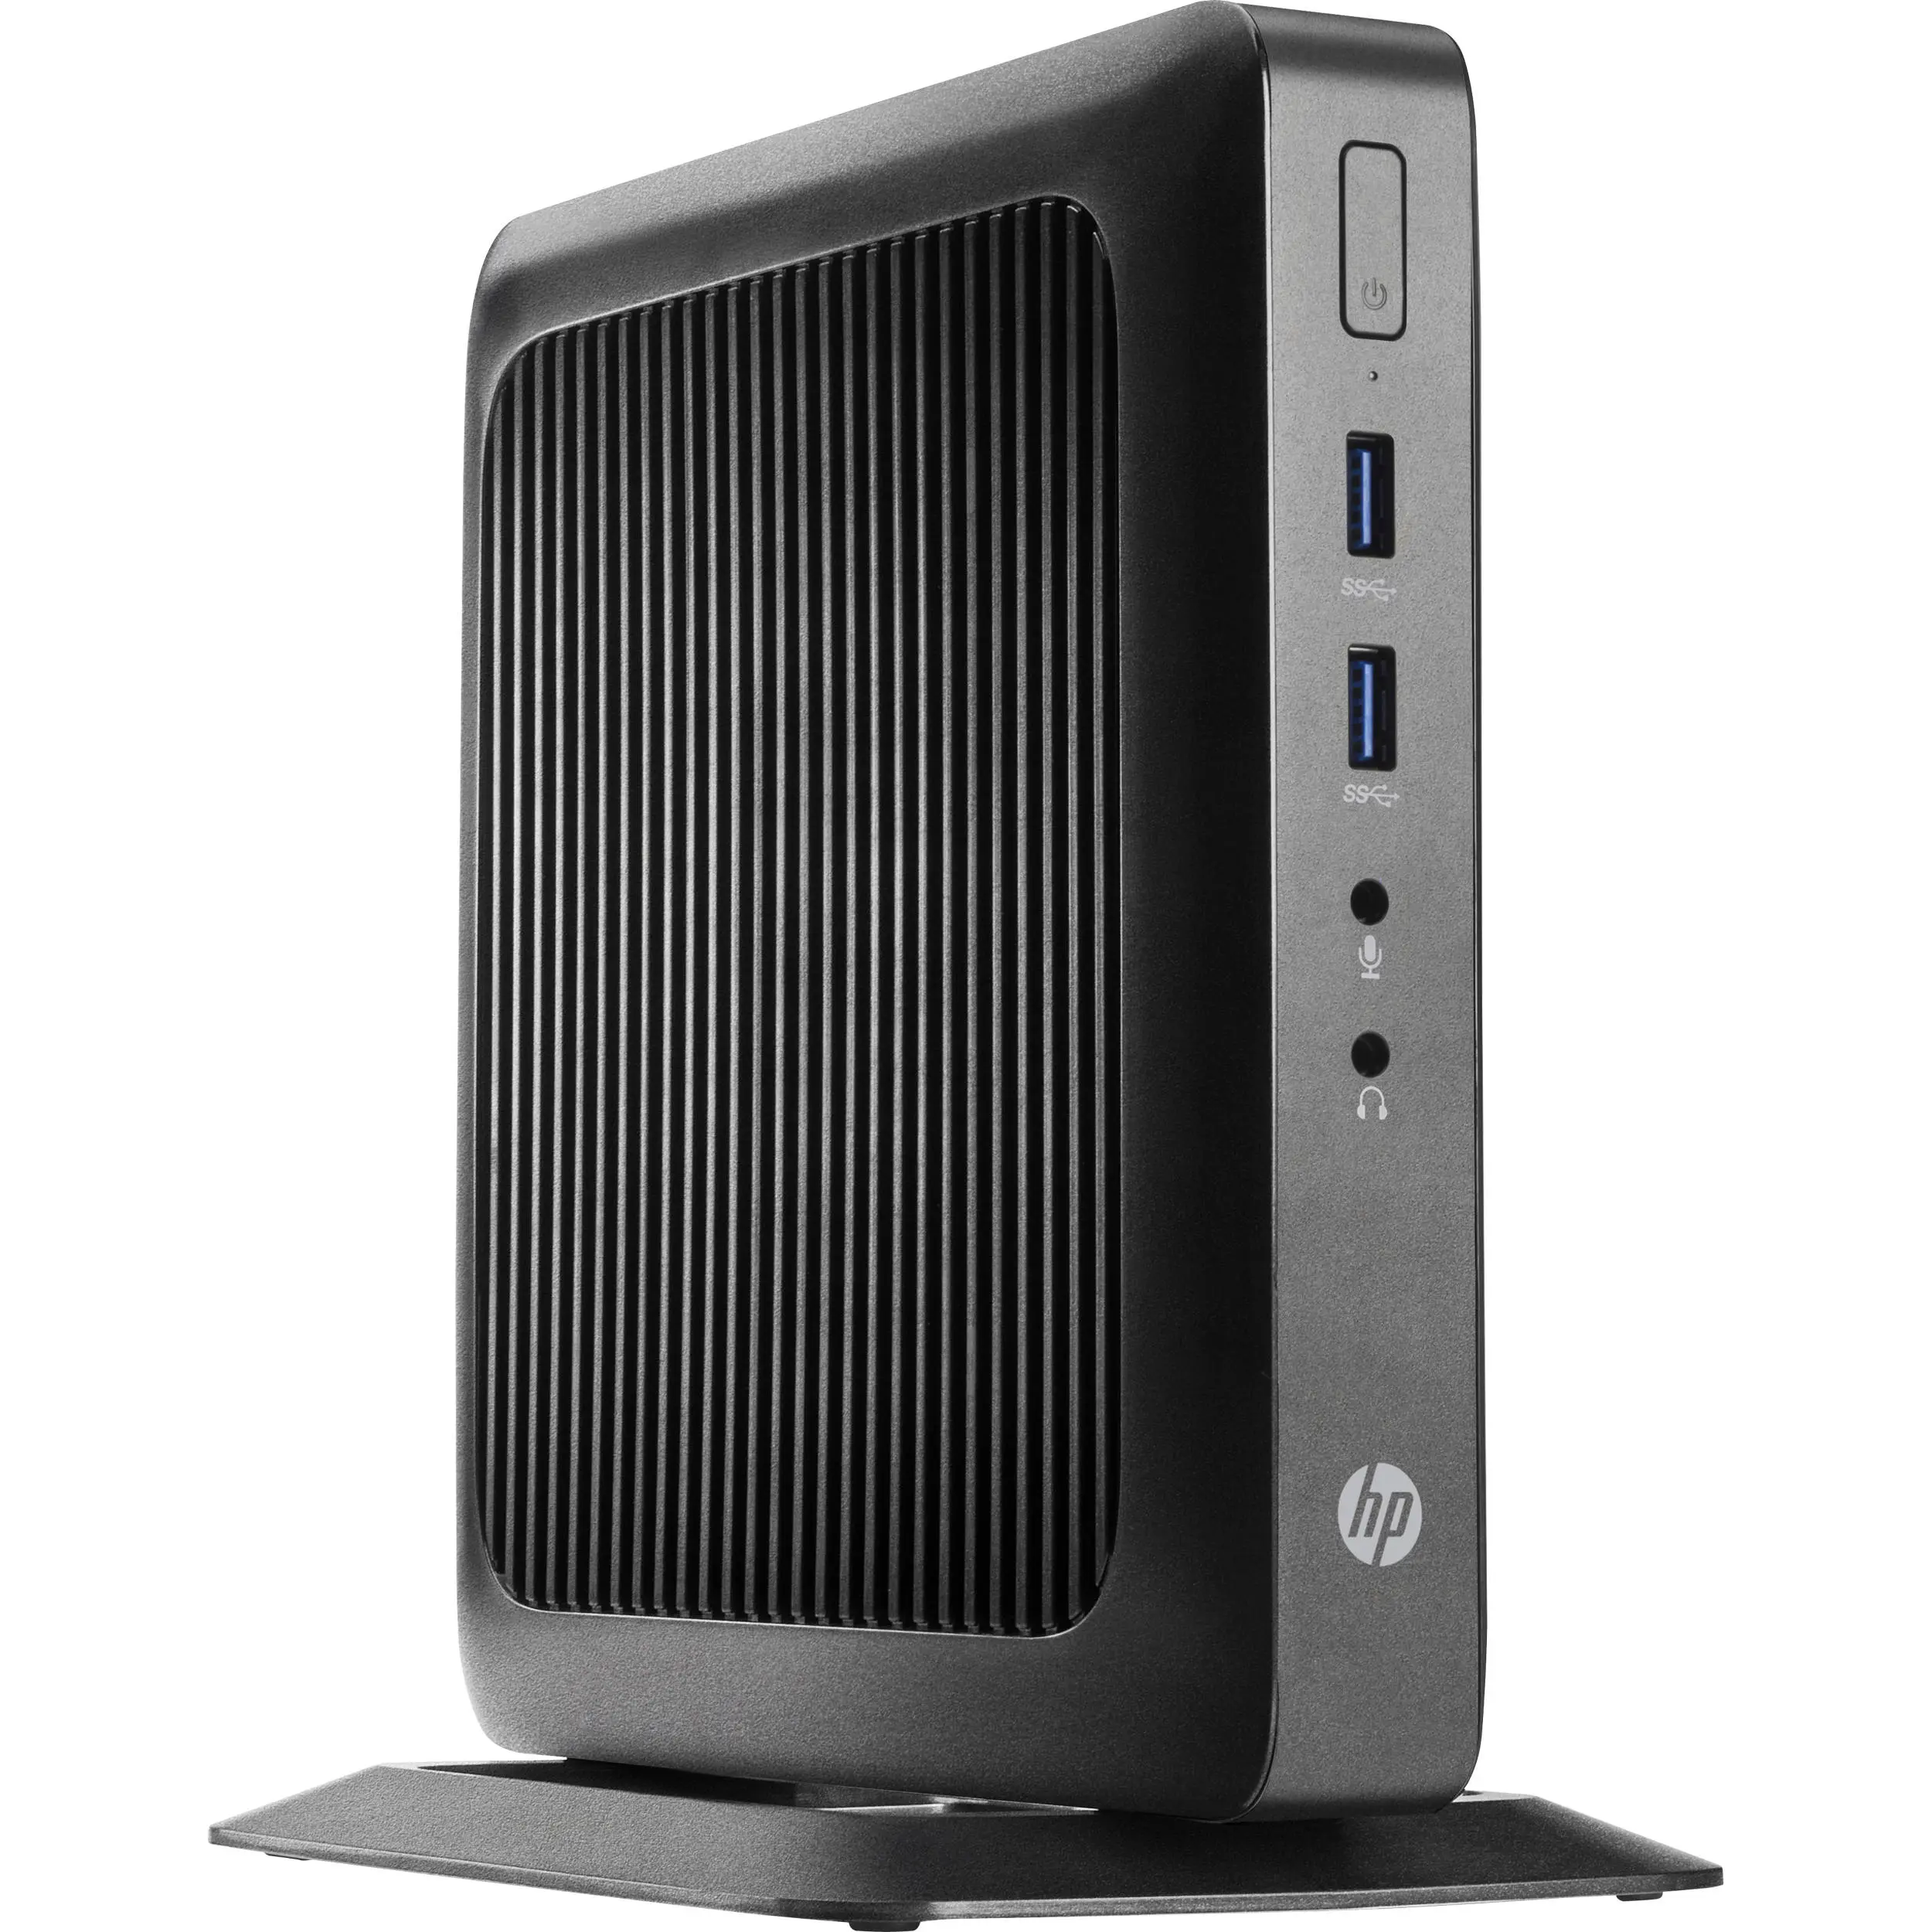 hewlett packard thin client - What is the difference between HP thin client and desktop